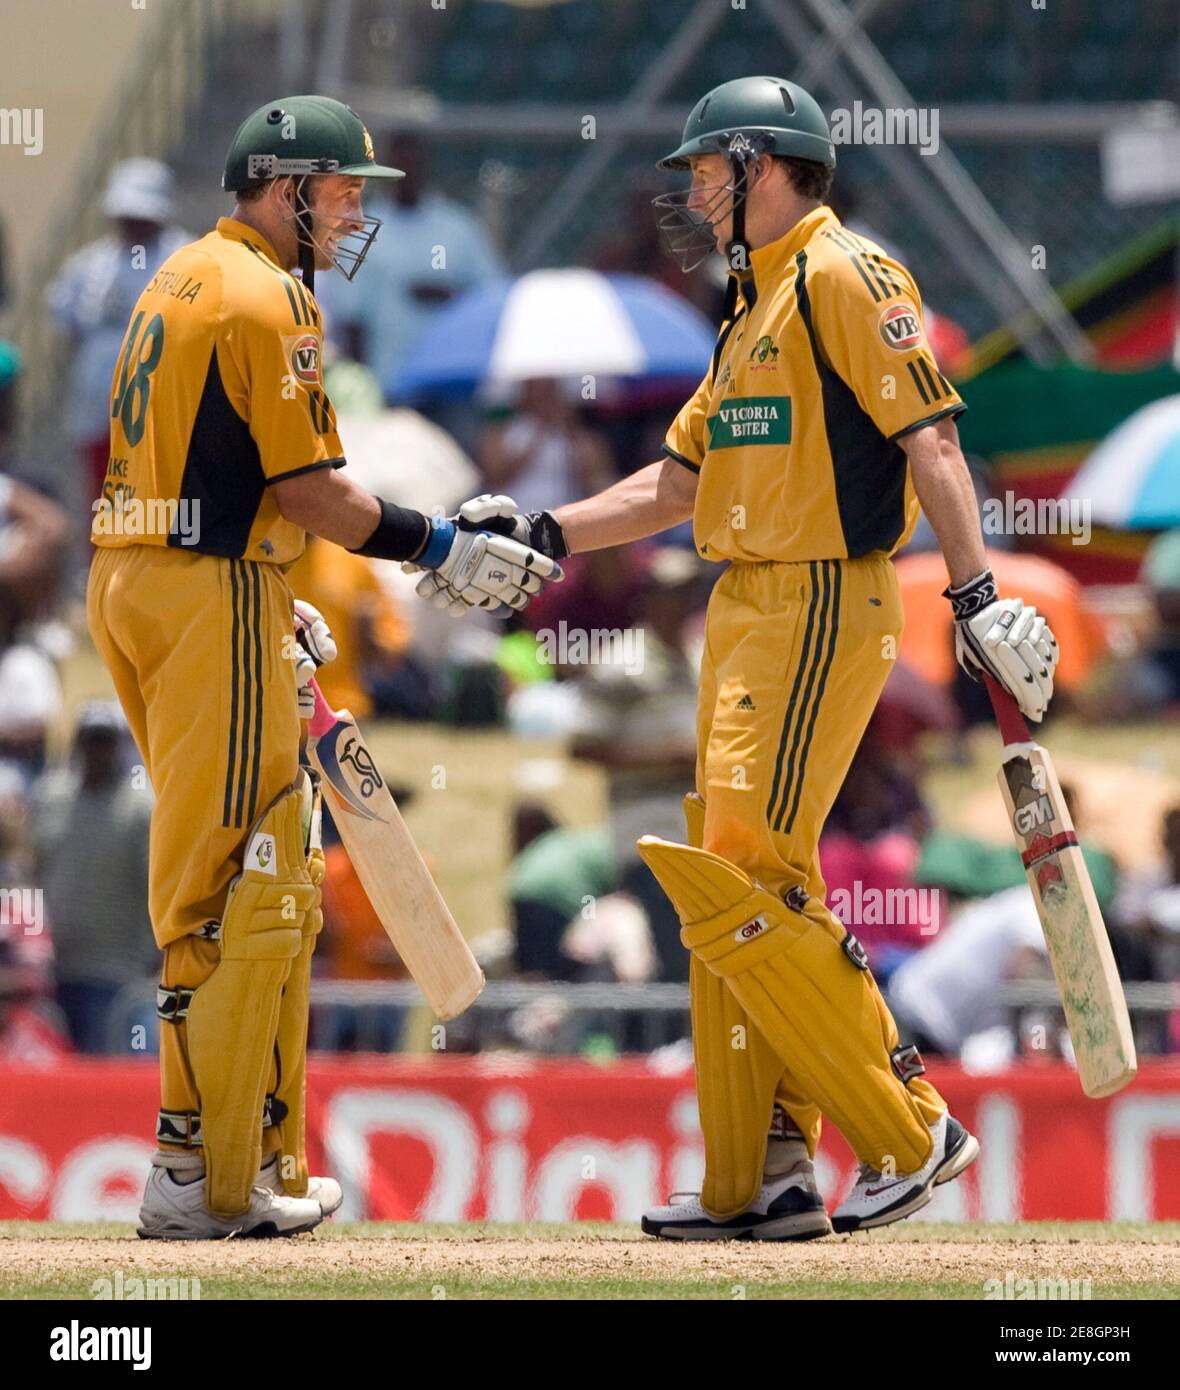 Australai's David Hussey (R) shakes hands with his brother Michael after he batted half century during their final one-day cricket international against West Indies in Basseterre, St. Kitts July 6, 2008.       REUTERS/Andy Clark        (ST KITTS) Stock Photo